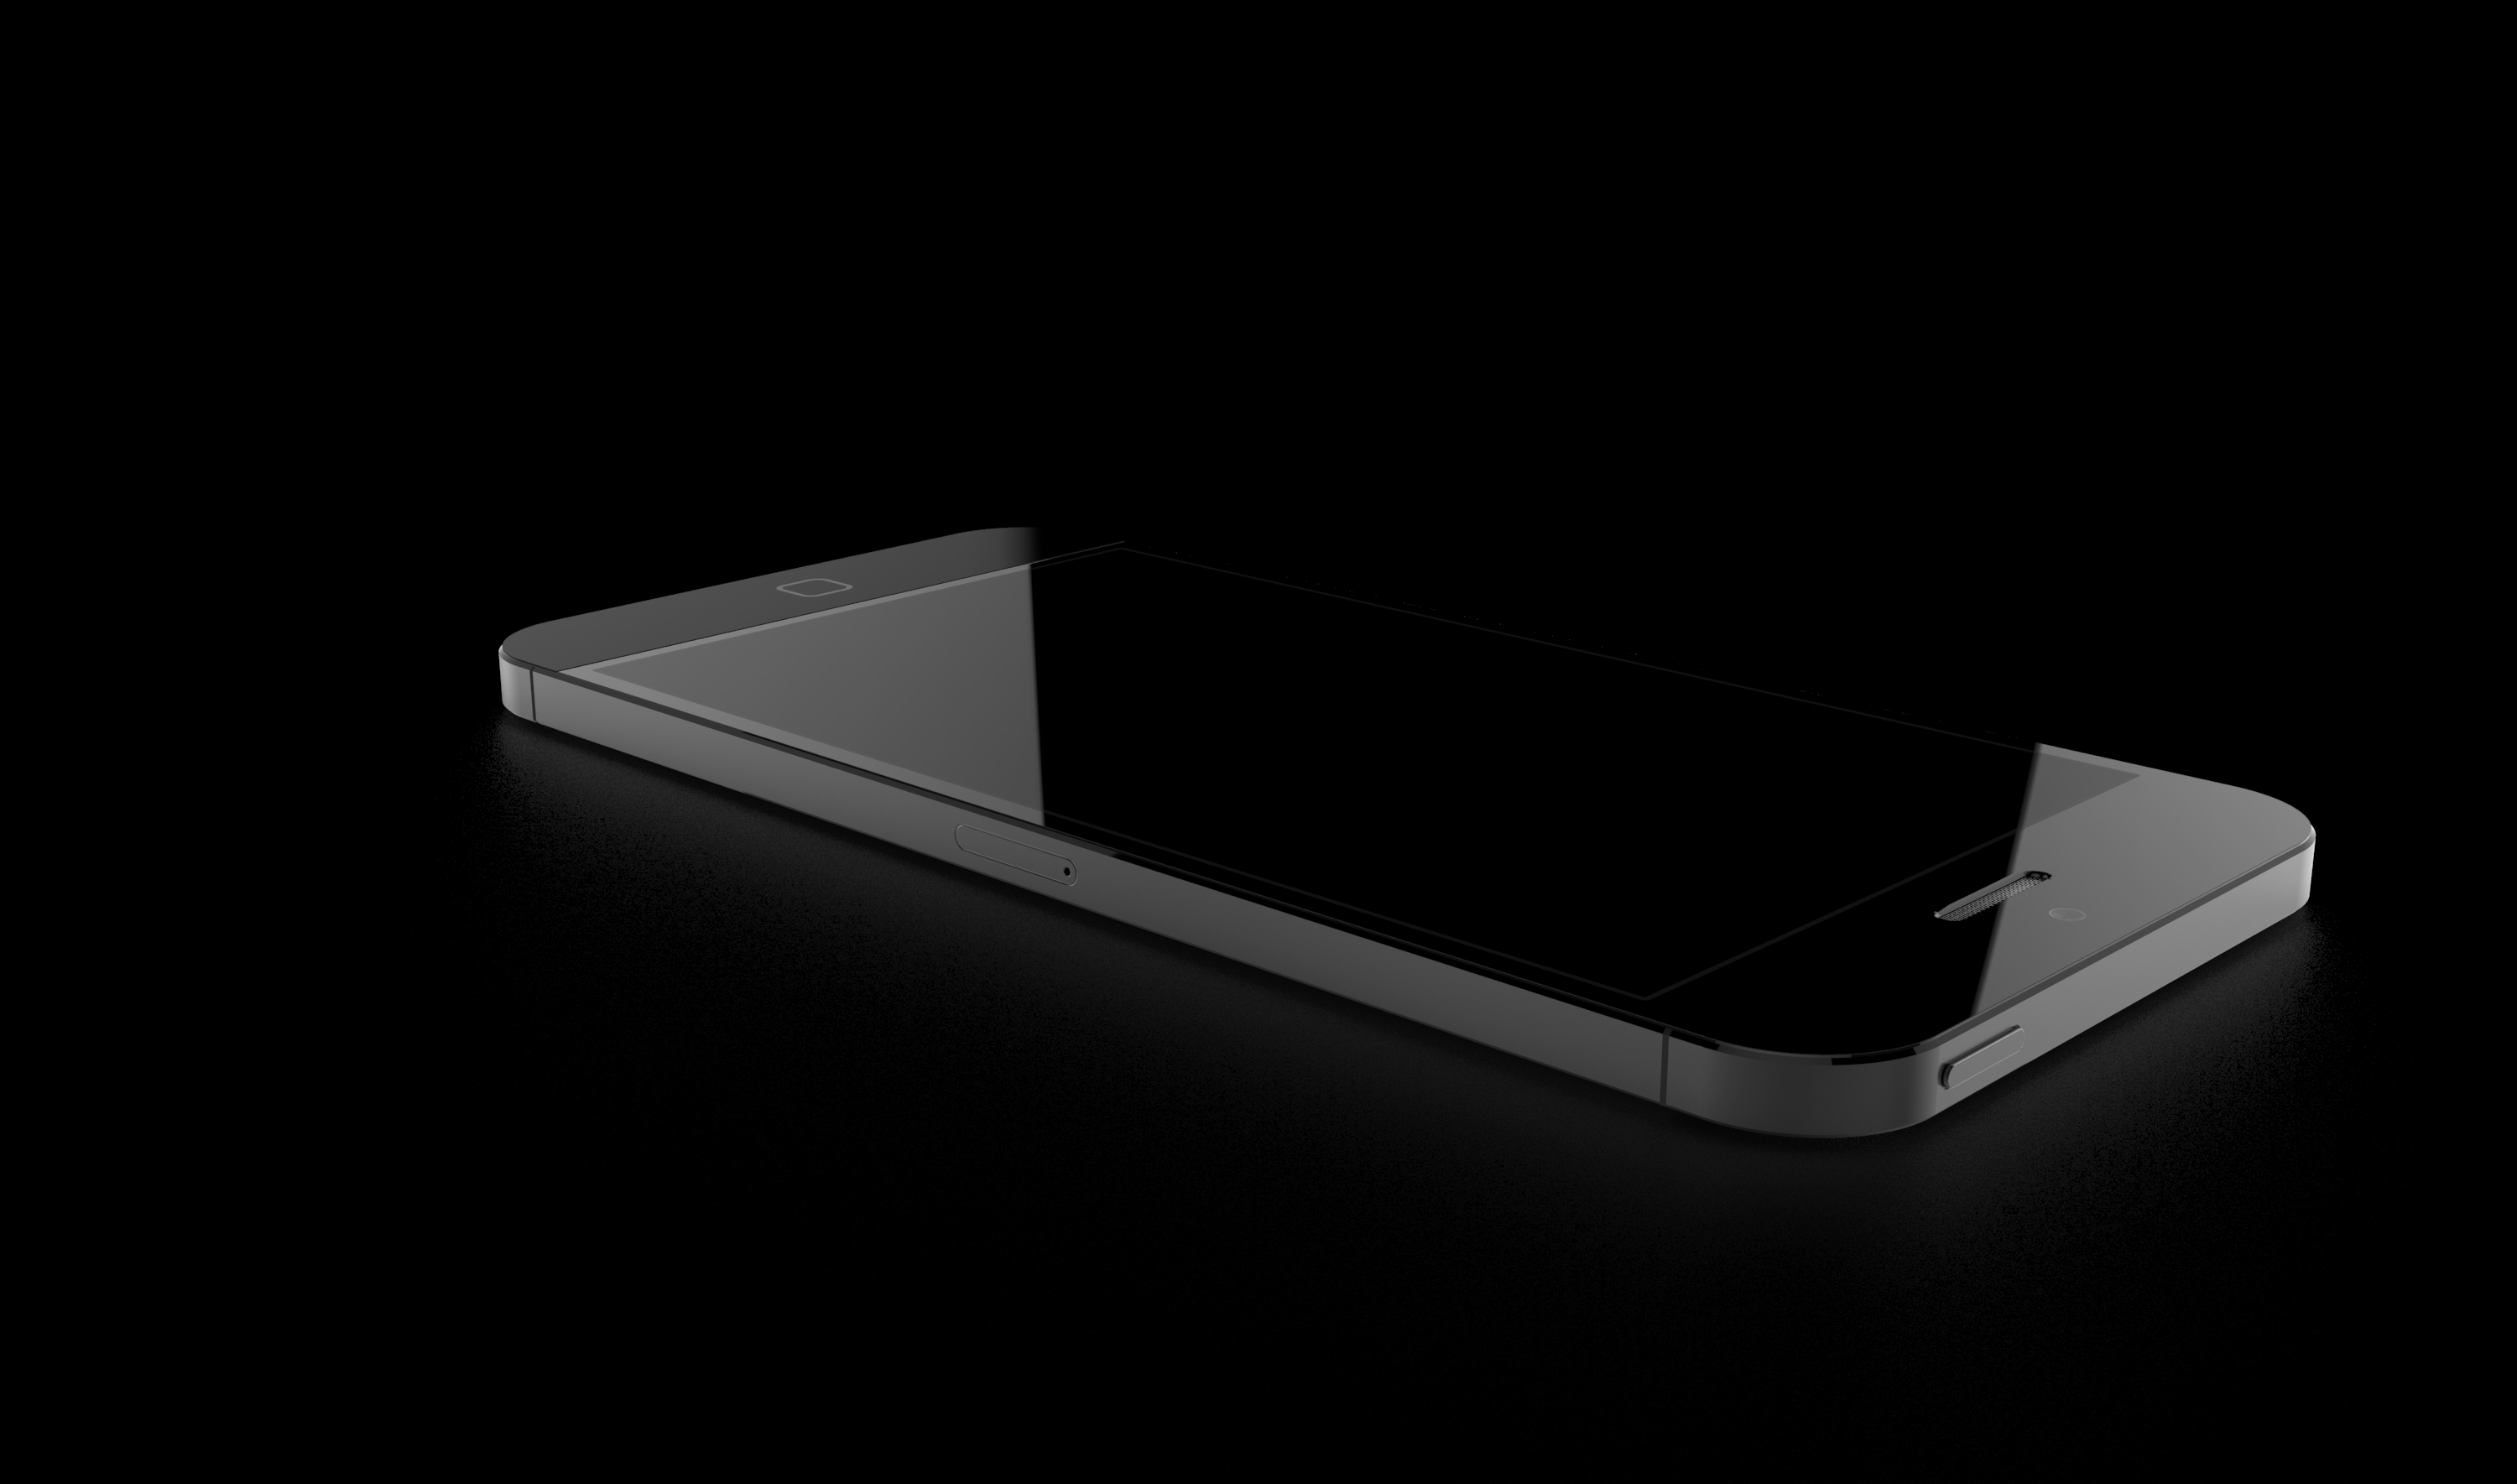 Black Apple iPhone Concept Wallpaper And Image